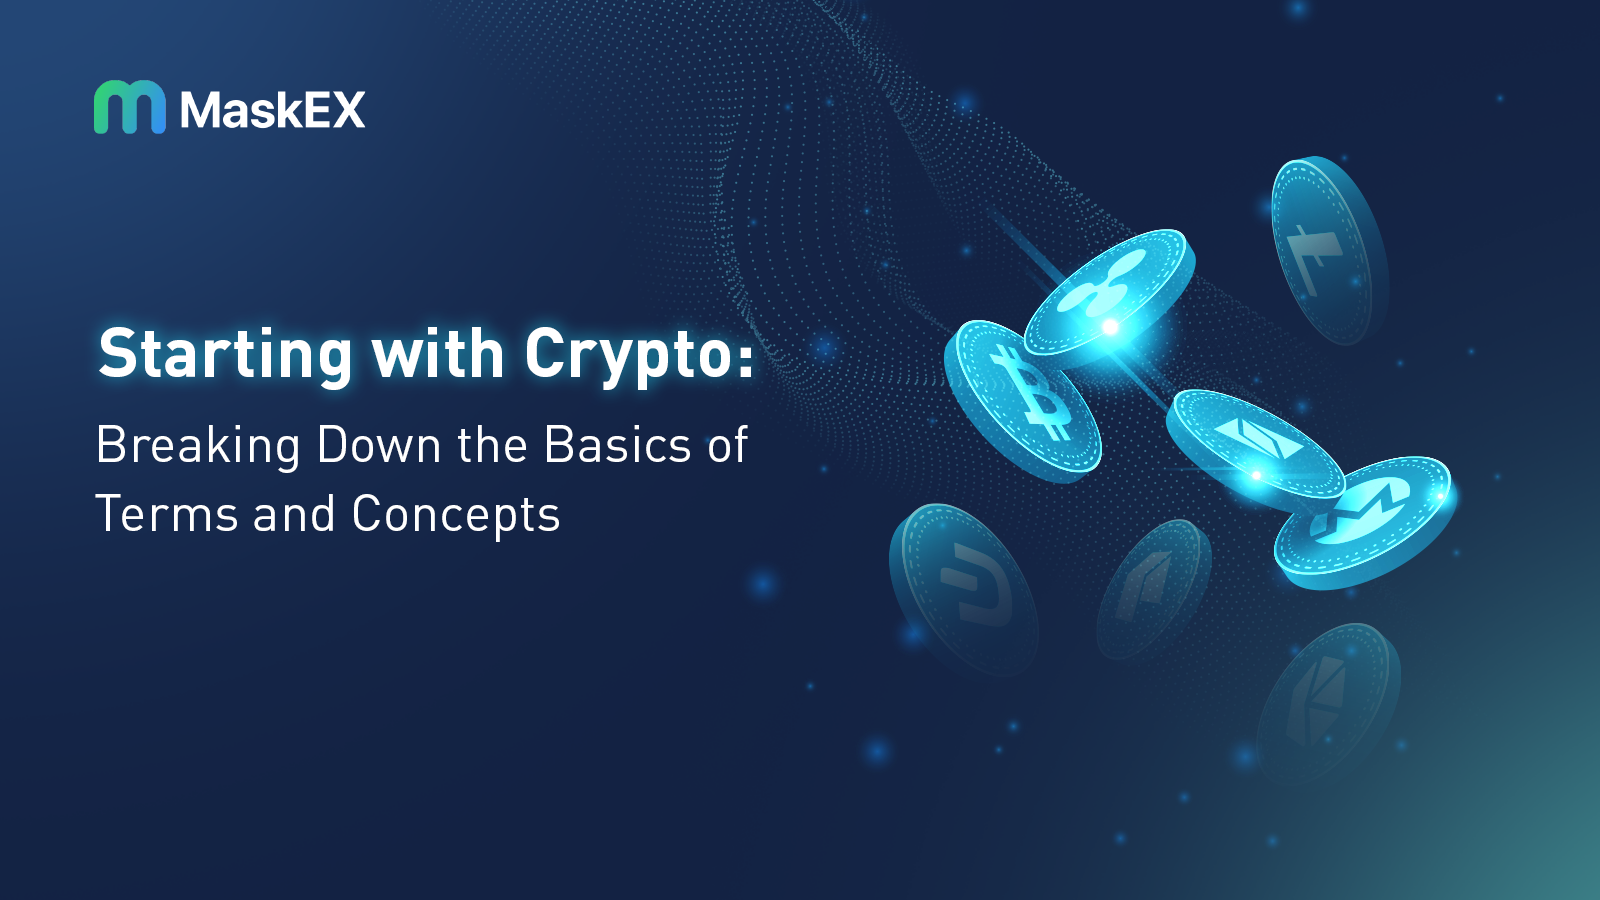 Starting with Crypto: Breaking Down the Basics of Terms and Concepts